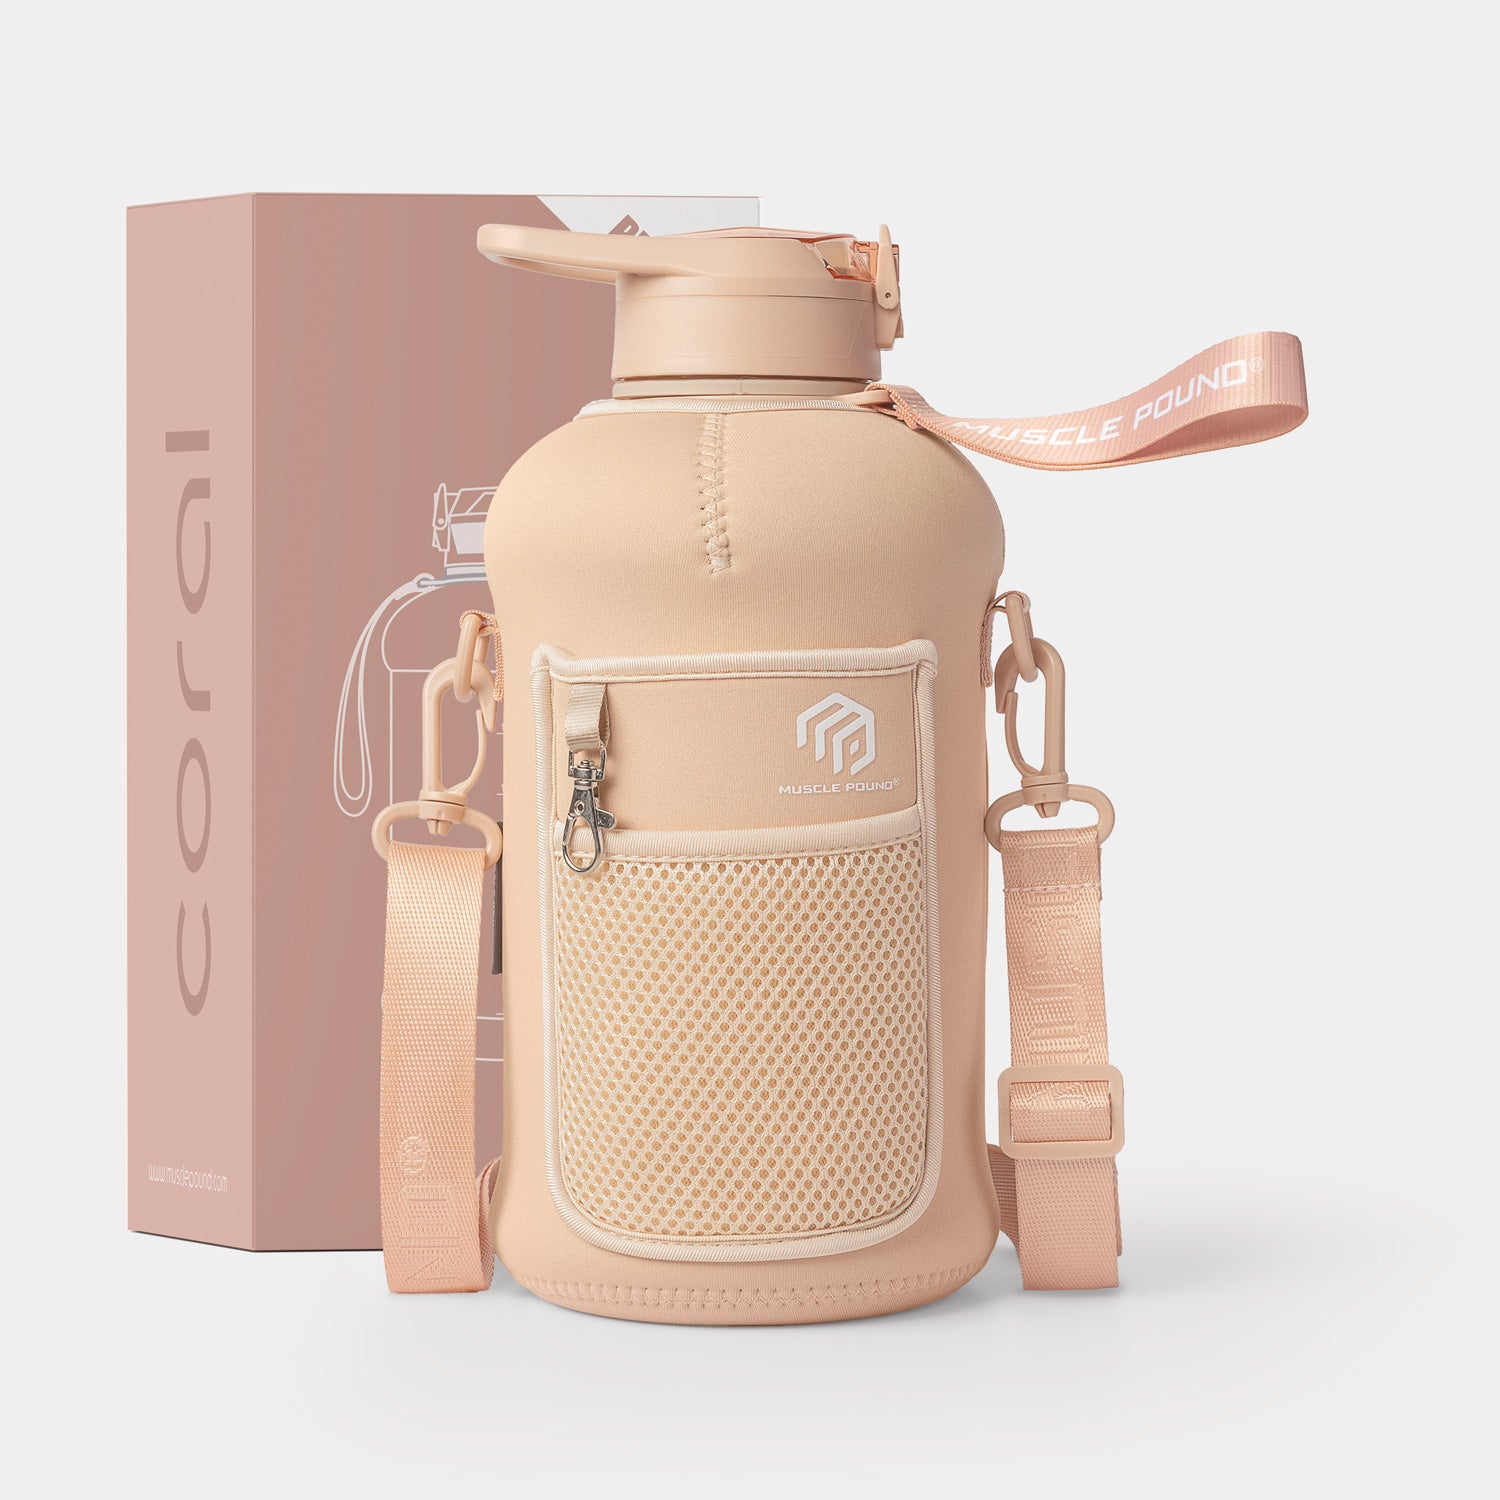 Side view of the Pro Jug in Coral showing the texture